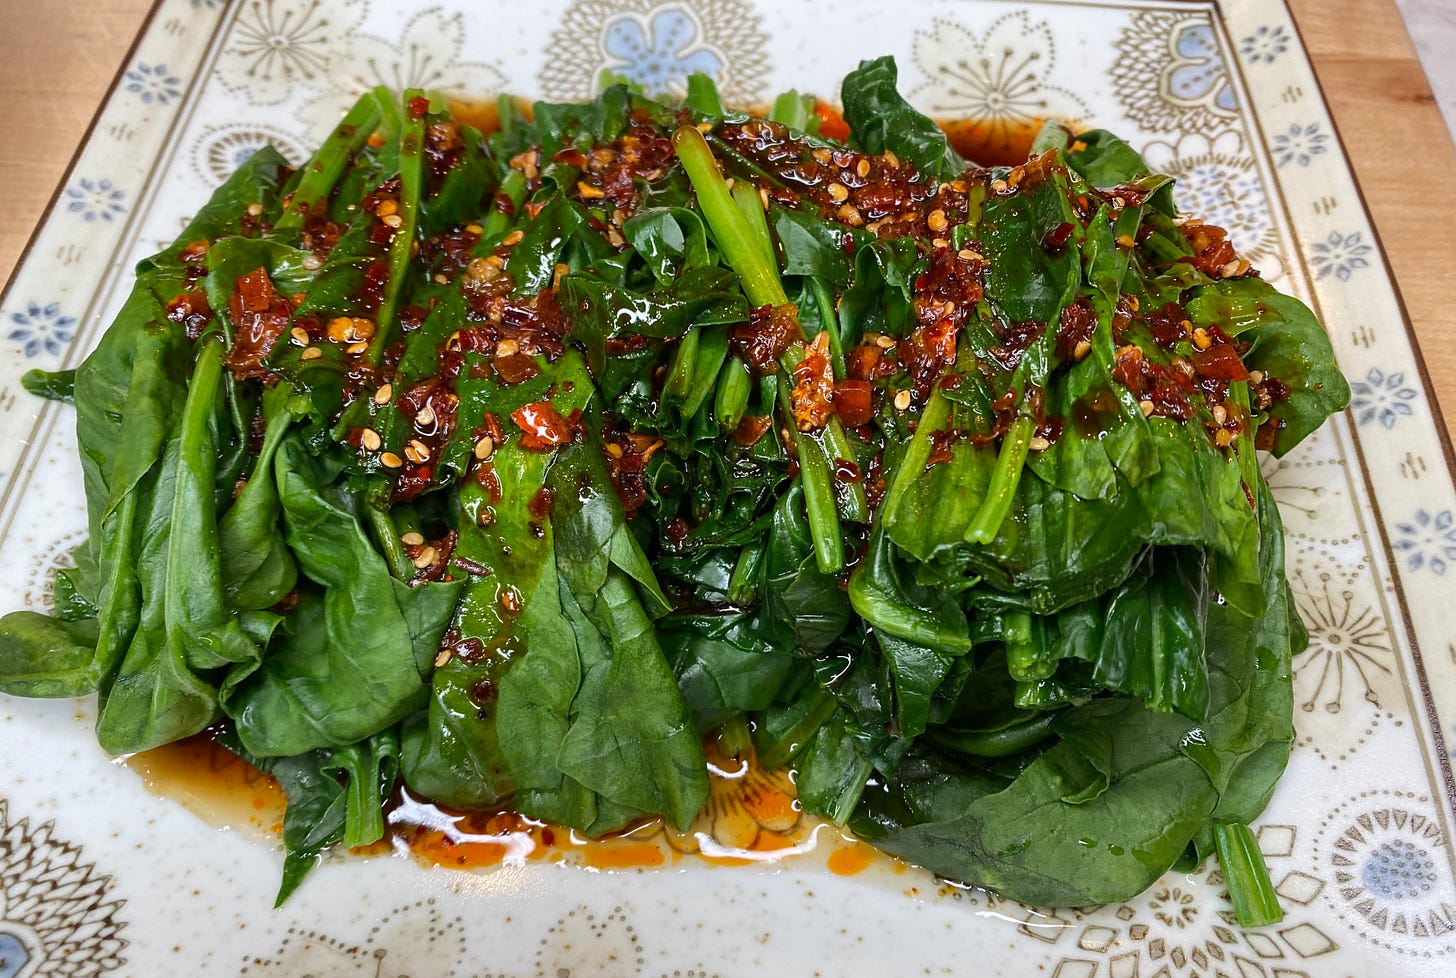 Spinach in spicy, sour sauce